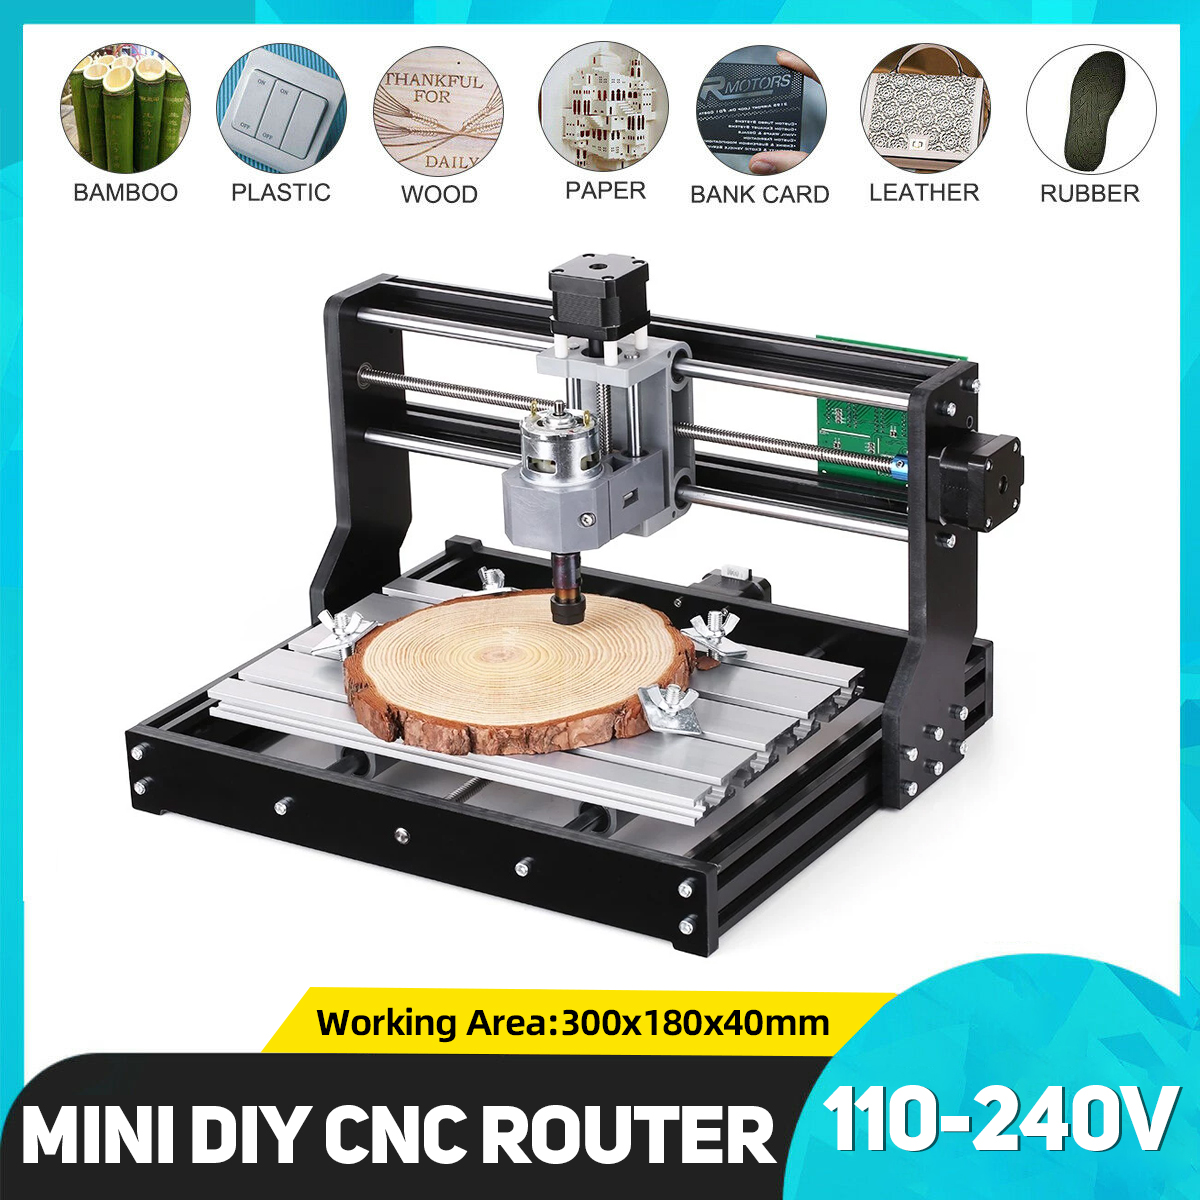 Fanrsquoensheng-3018-Pro-3-Axis-Mini-DIY-CNC-Router-Adjustable-Speed-Spindle-Motor-Wood-Engraving-Ma-1463876-1